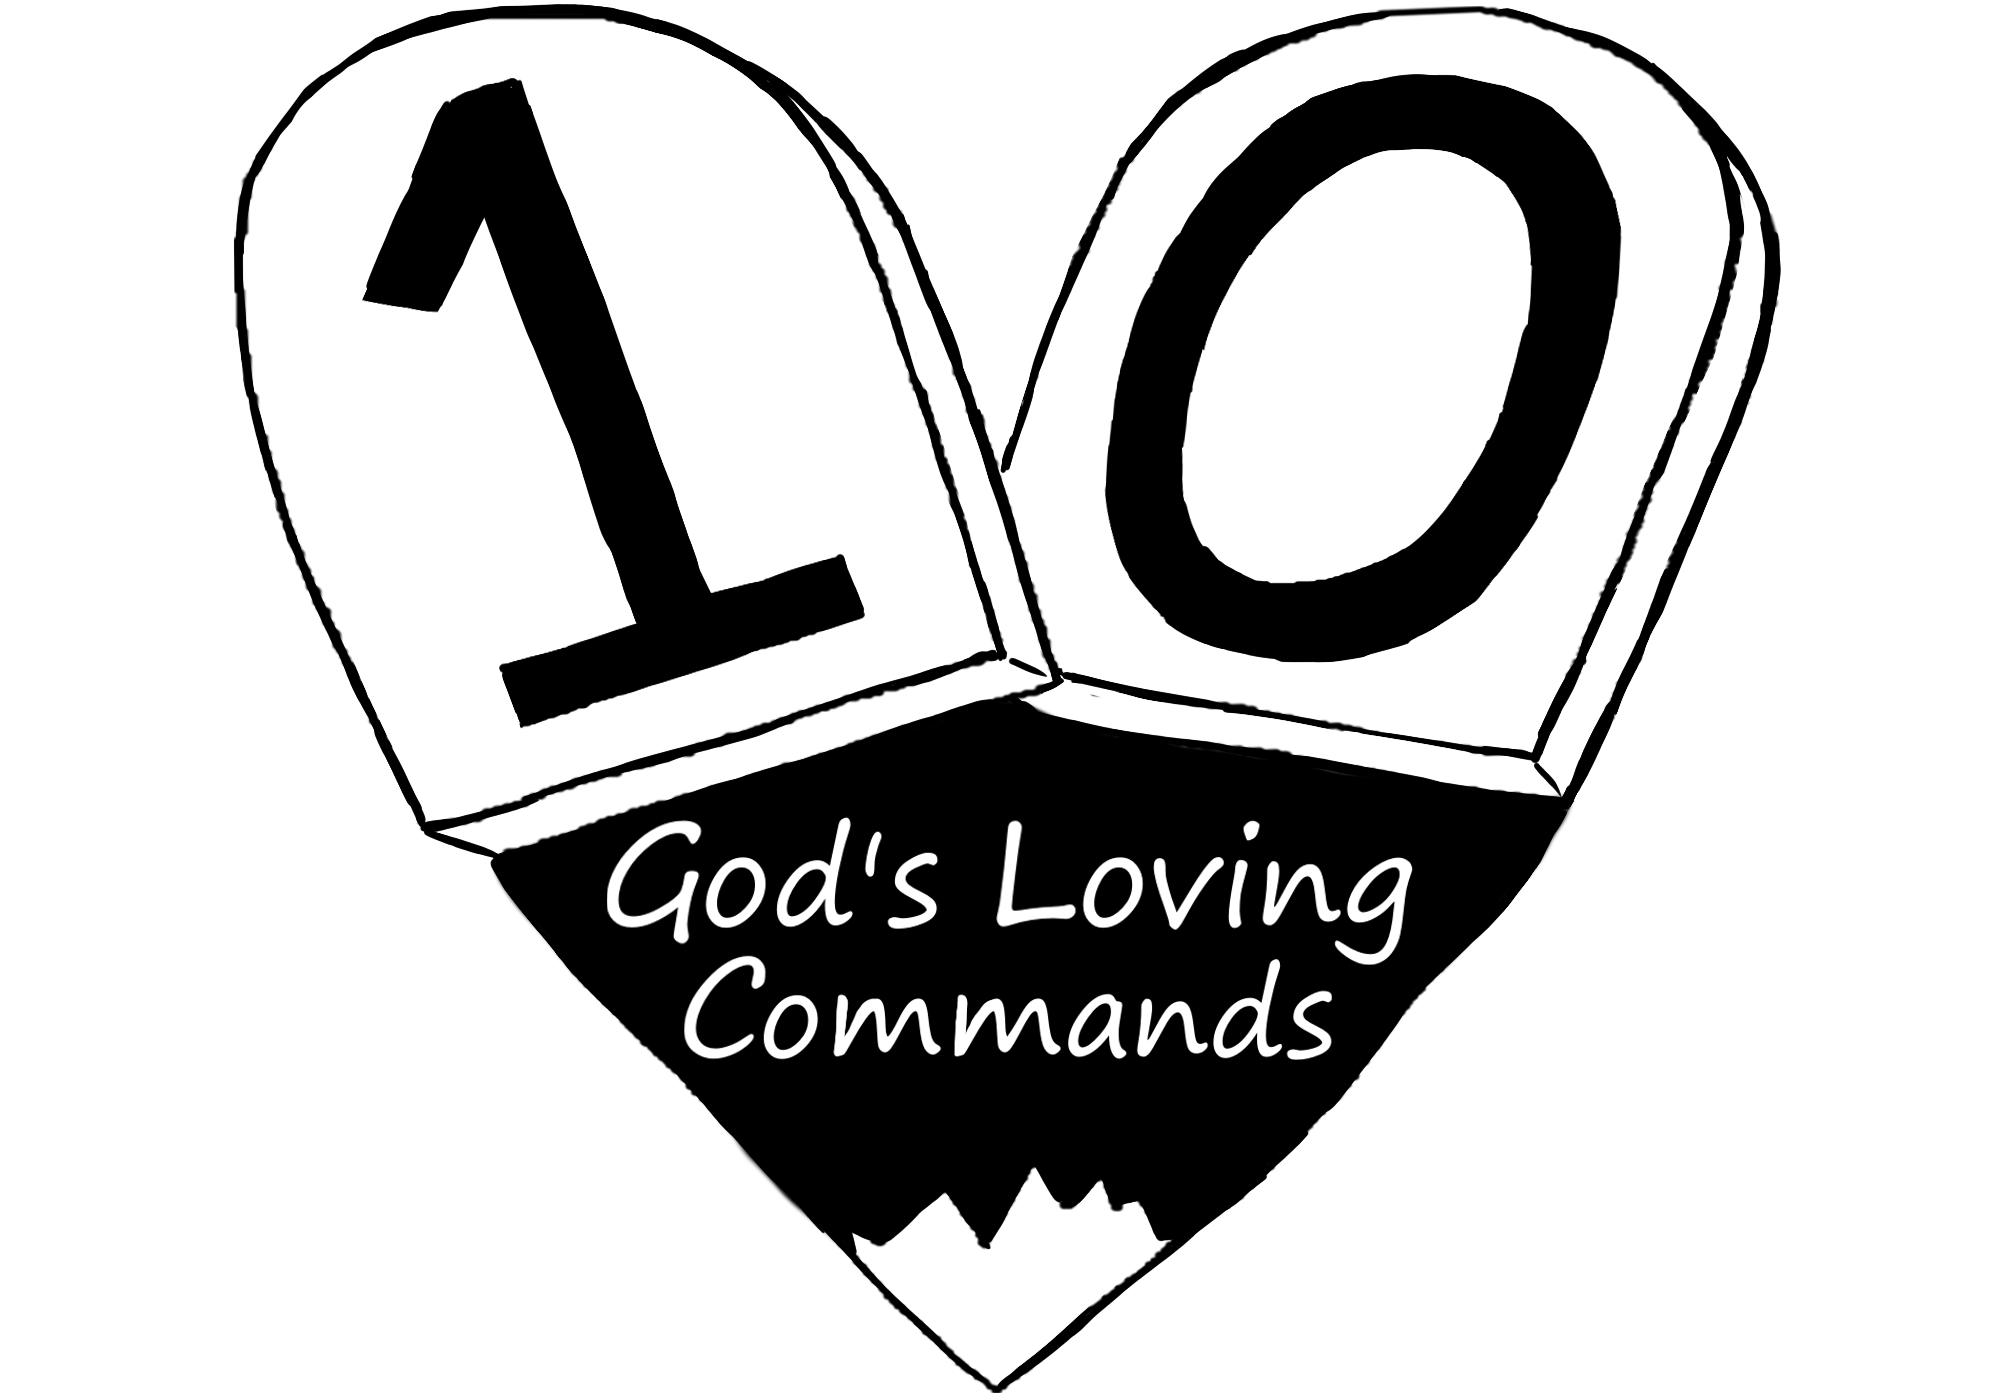 Illustration of two stone tablets with the number 10 written on them, which cast a shadow shaped like a mountain that contains text saying "God's Loving Commands".